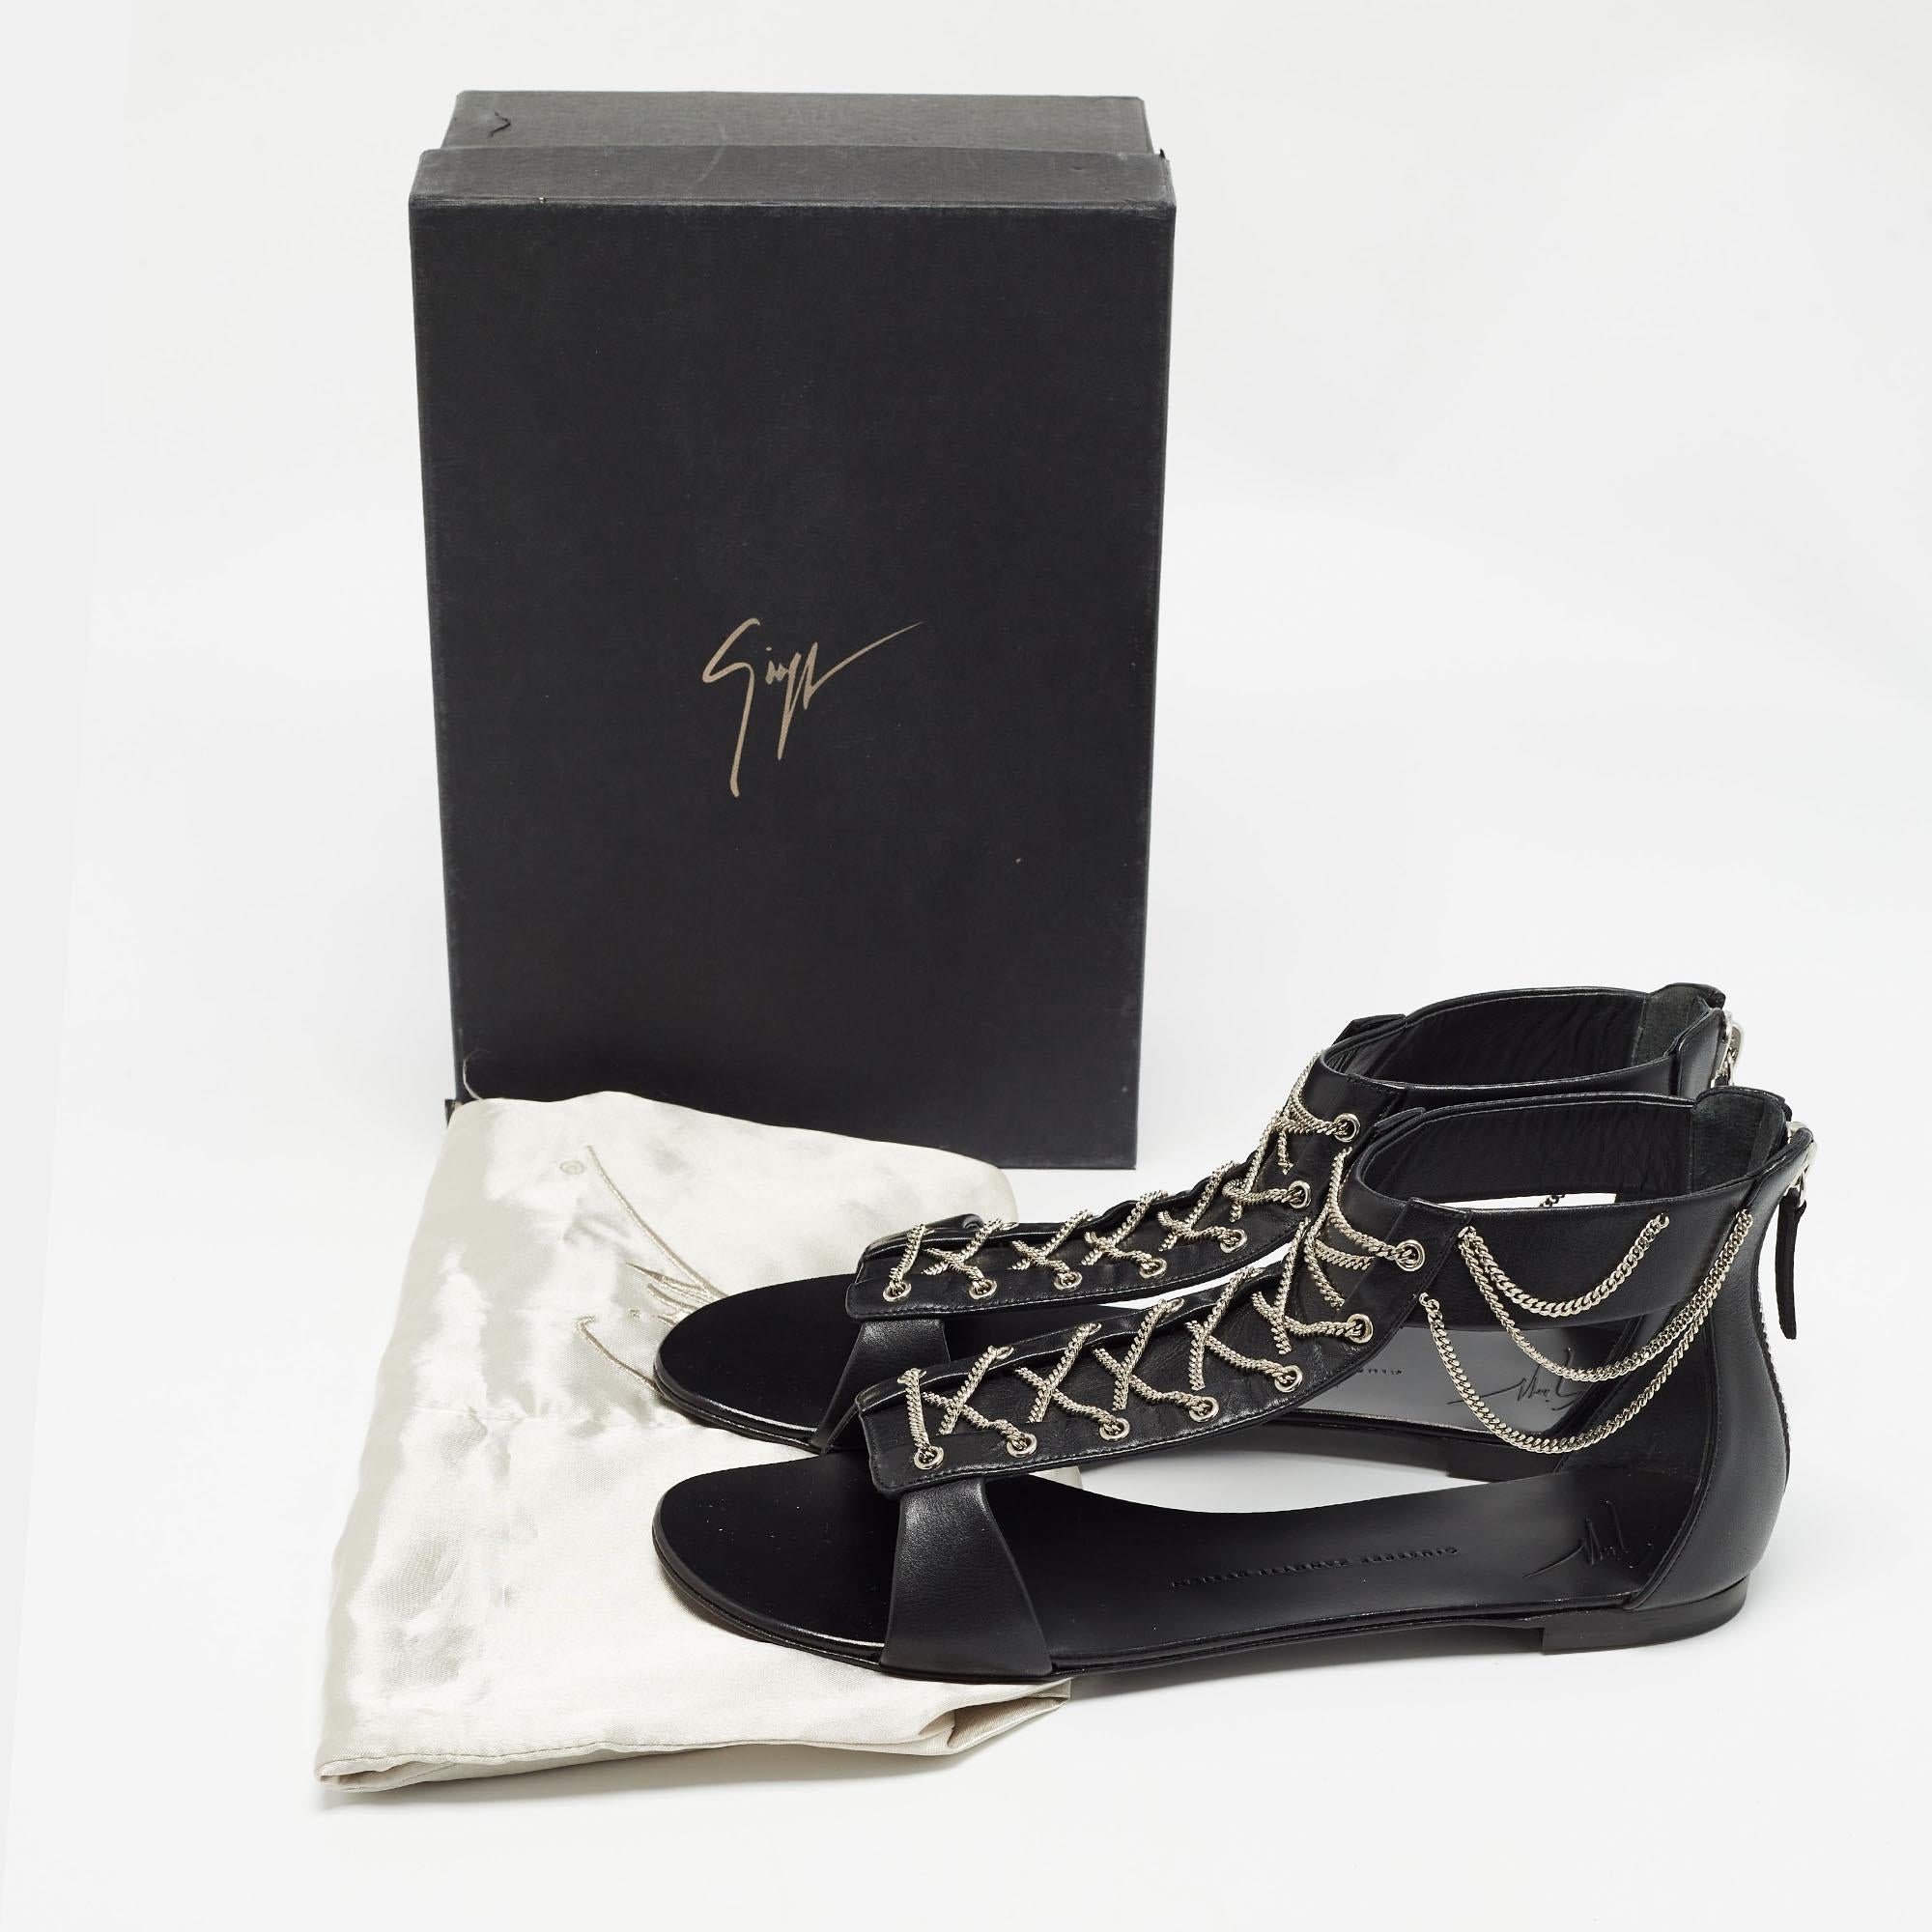 Giuseppe Zanotti Black Leather Roll Chain Flat Sandals Size 41 For Sale 6